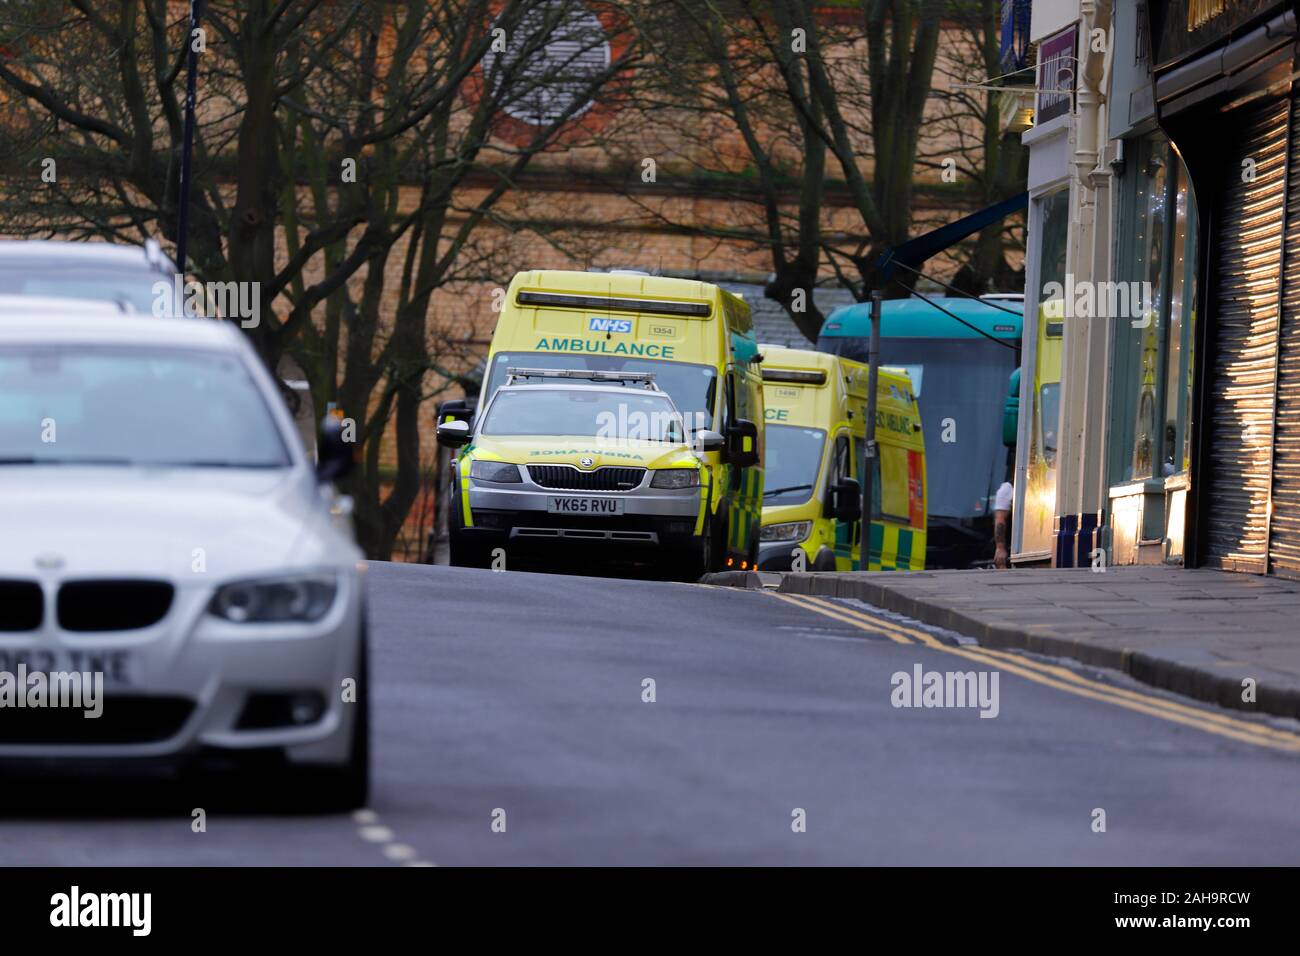 Emergency ambulances parked outside the Royal Hotel in Scarborough. Stock Photo